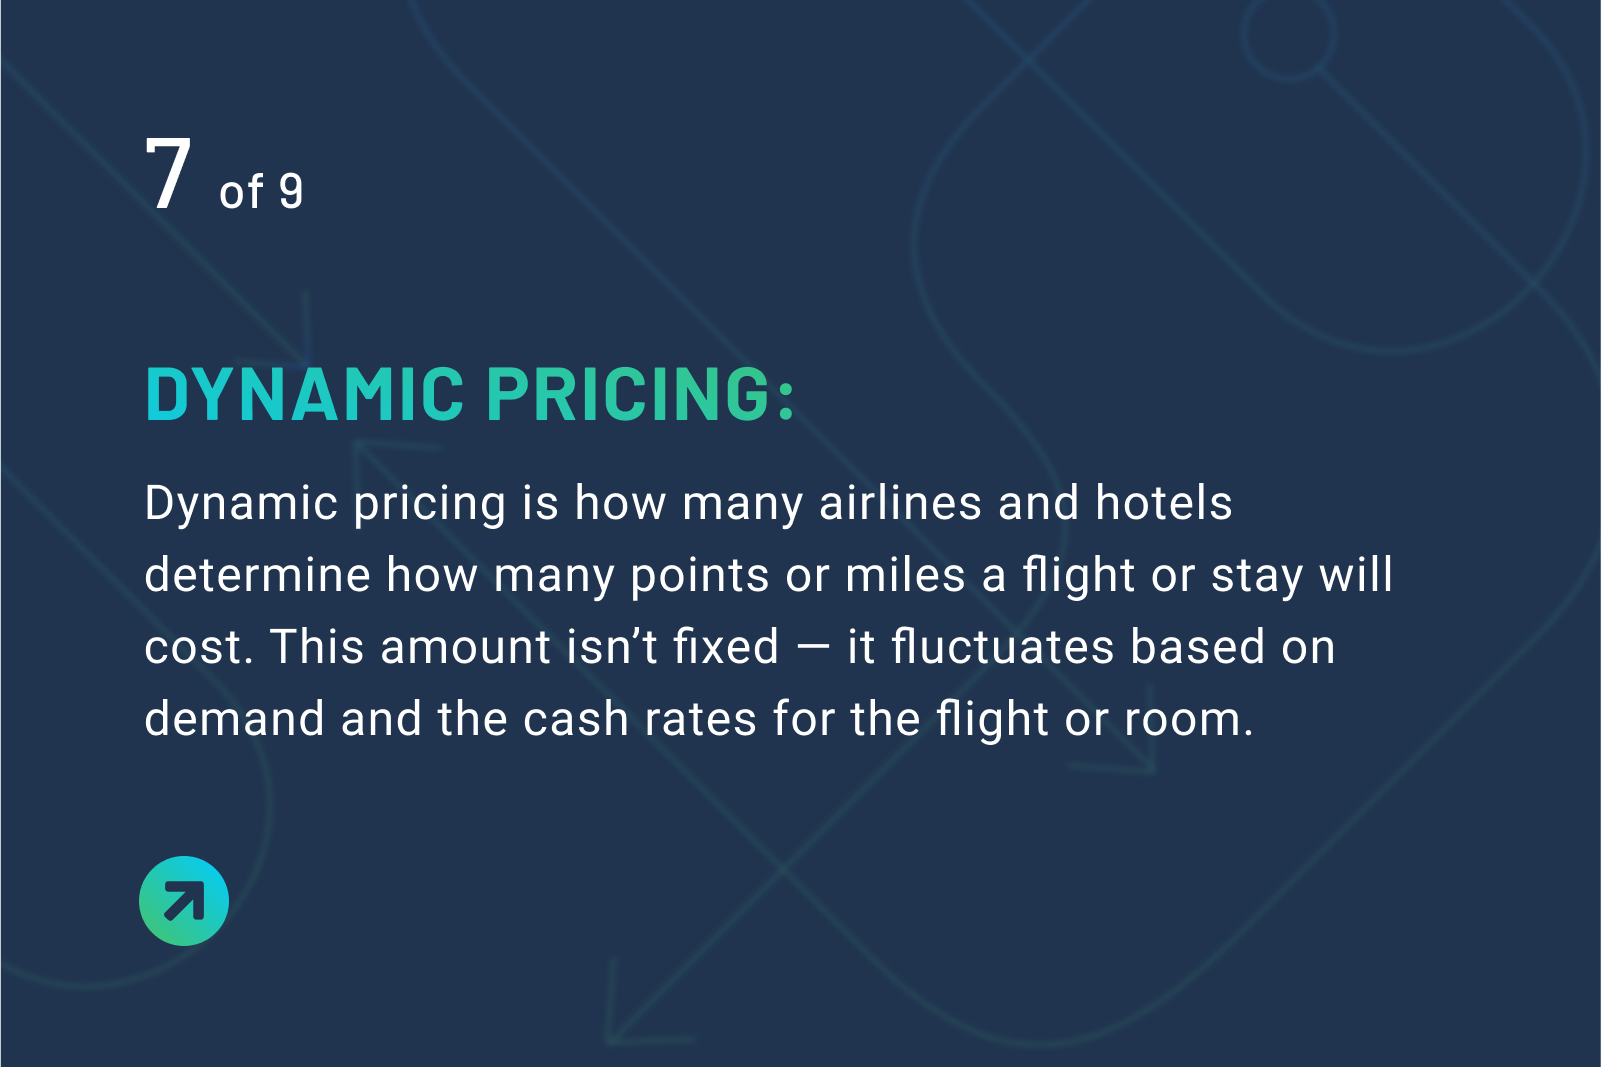 Dynamic pricing definition: Dynamic pricing is how many airlines and hotels determine how many points or miles a flight or stay will cost. This amount isn’t fixed — it fluctuates based on demand and the cash rates for the flight or room.